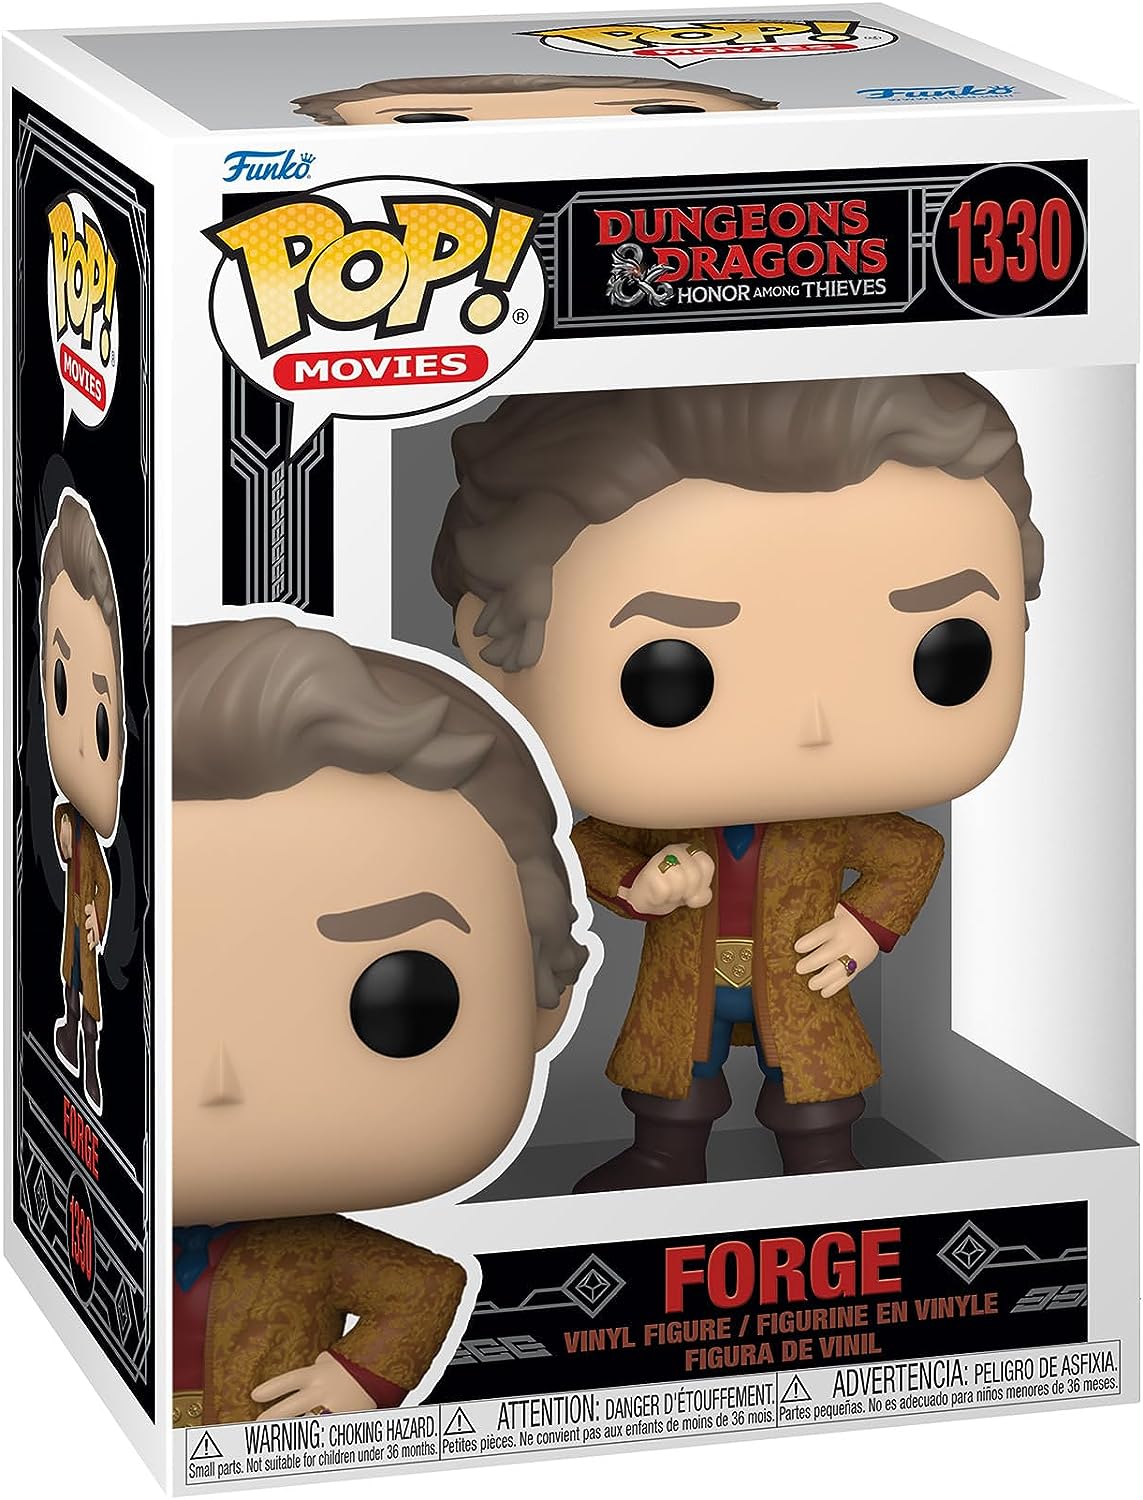 Funko Pop! Movies: Dungeons & Dragons - Forge, Collectable Vinyl Figure